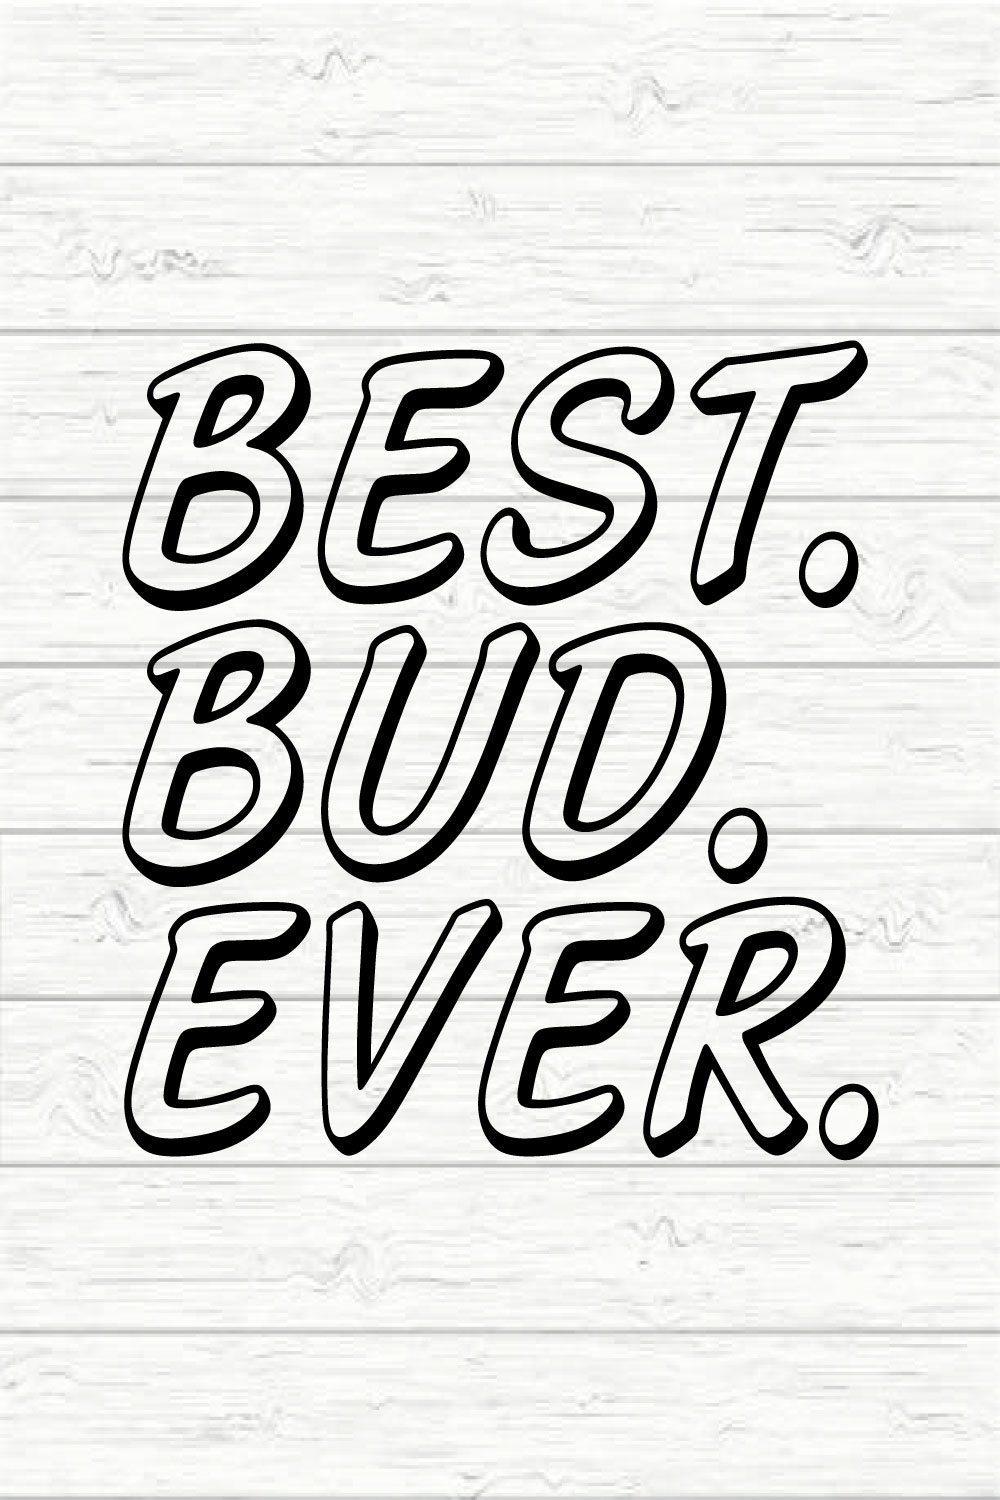 Best bud ever pinterest preview image.